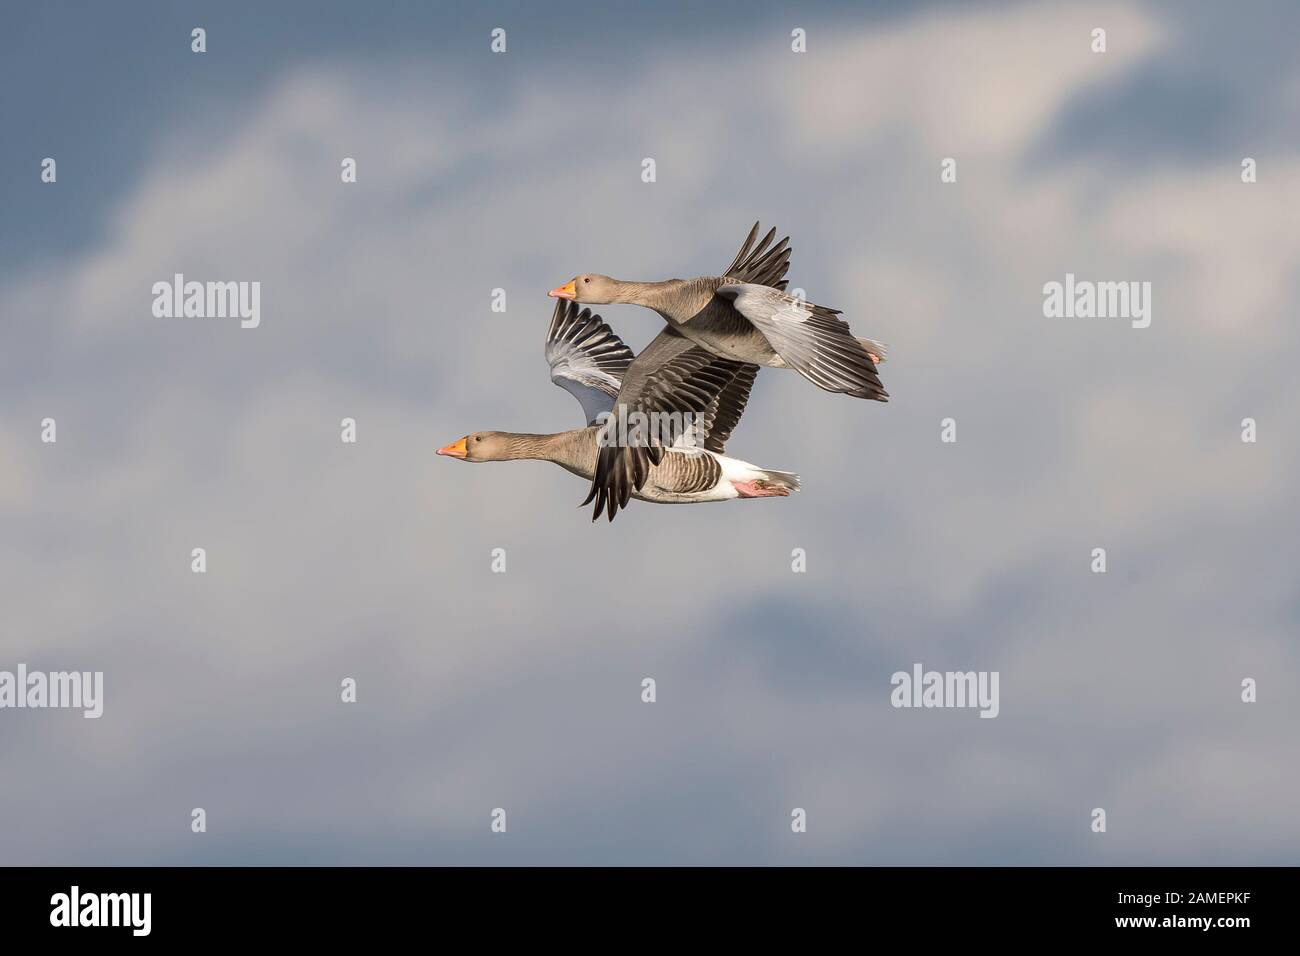 Low angle pair of wild sunlit UK greylag geese (Anser anser) isolated in midair flight. Geese flying free, high in blue sky cloud, in winter sunshine. Stock Photo